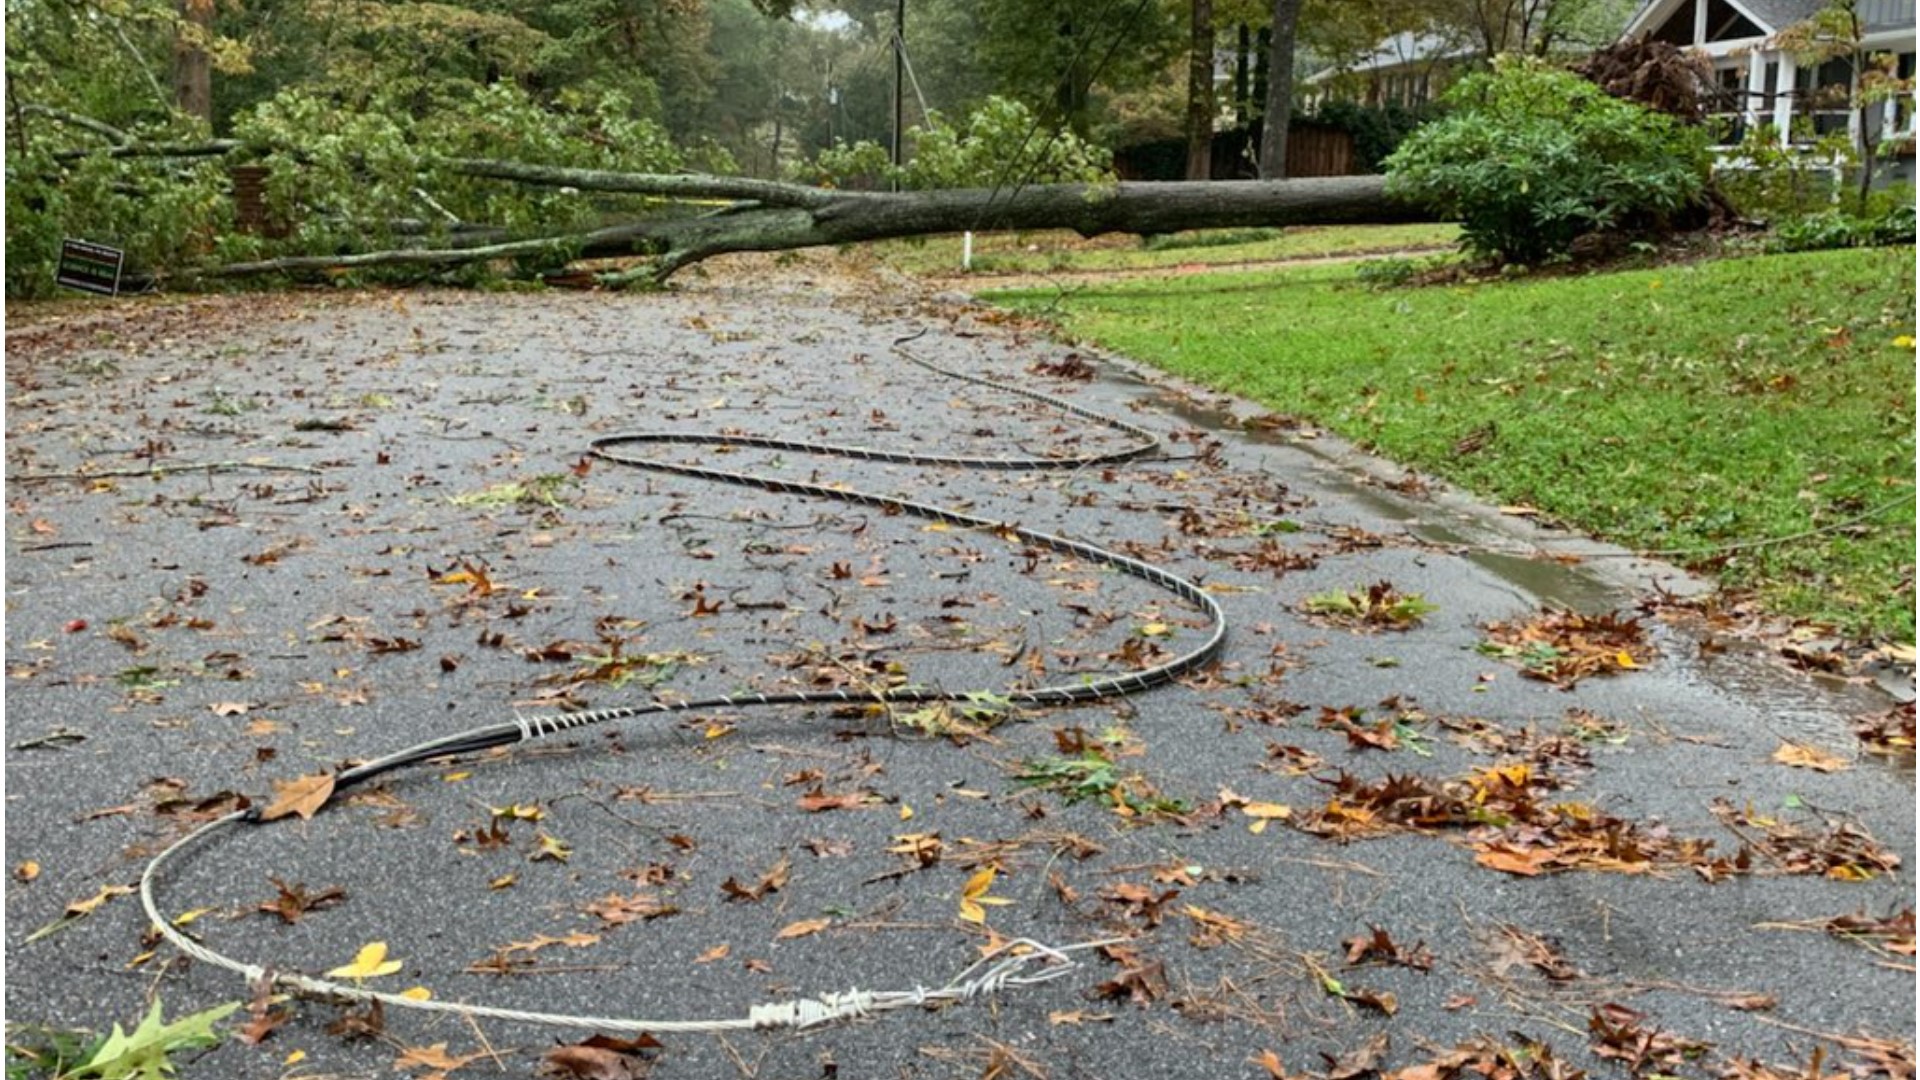 It has been four days since the storm knocked out power to hundreds of thousands of customers.